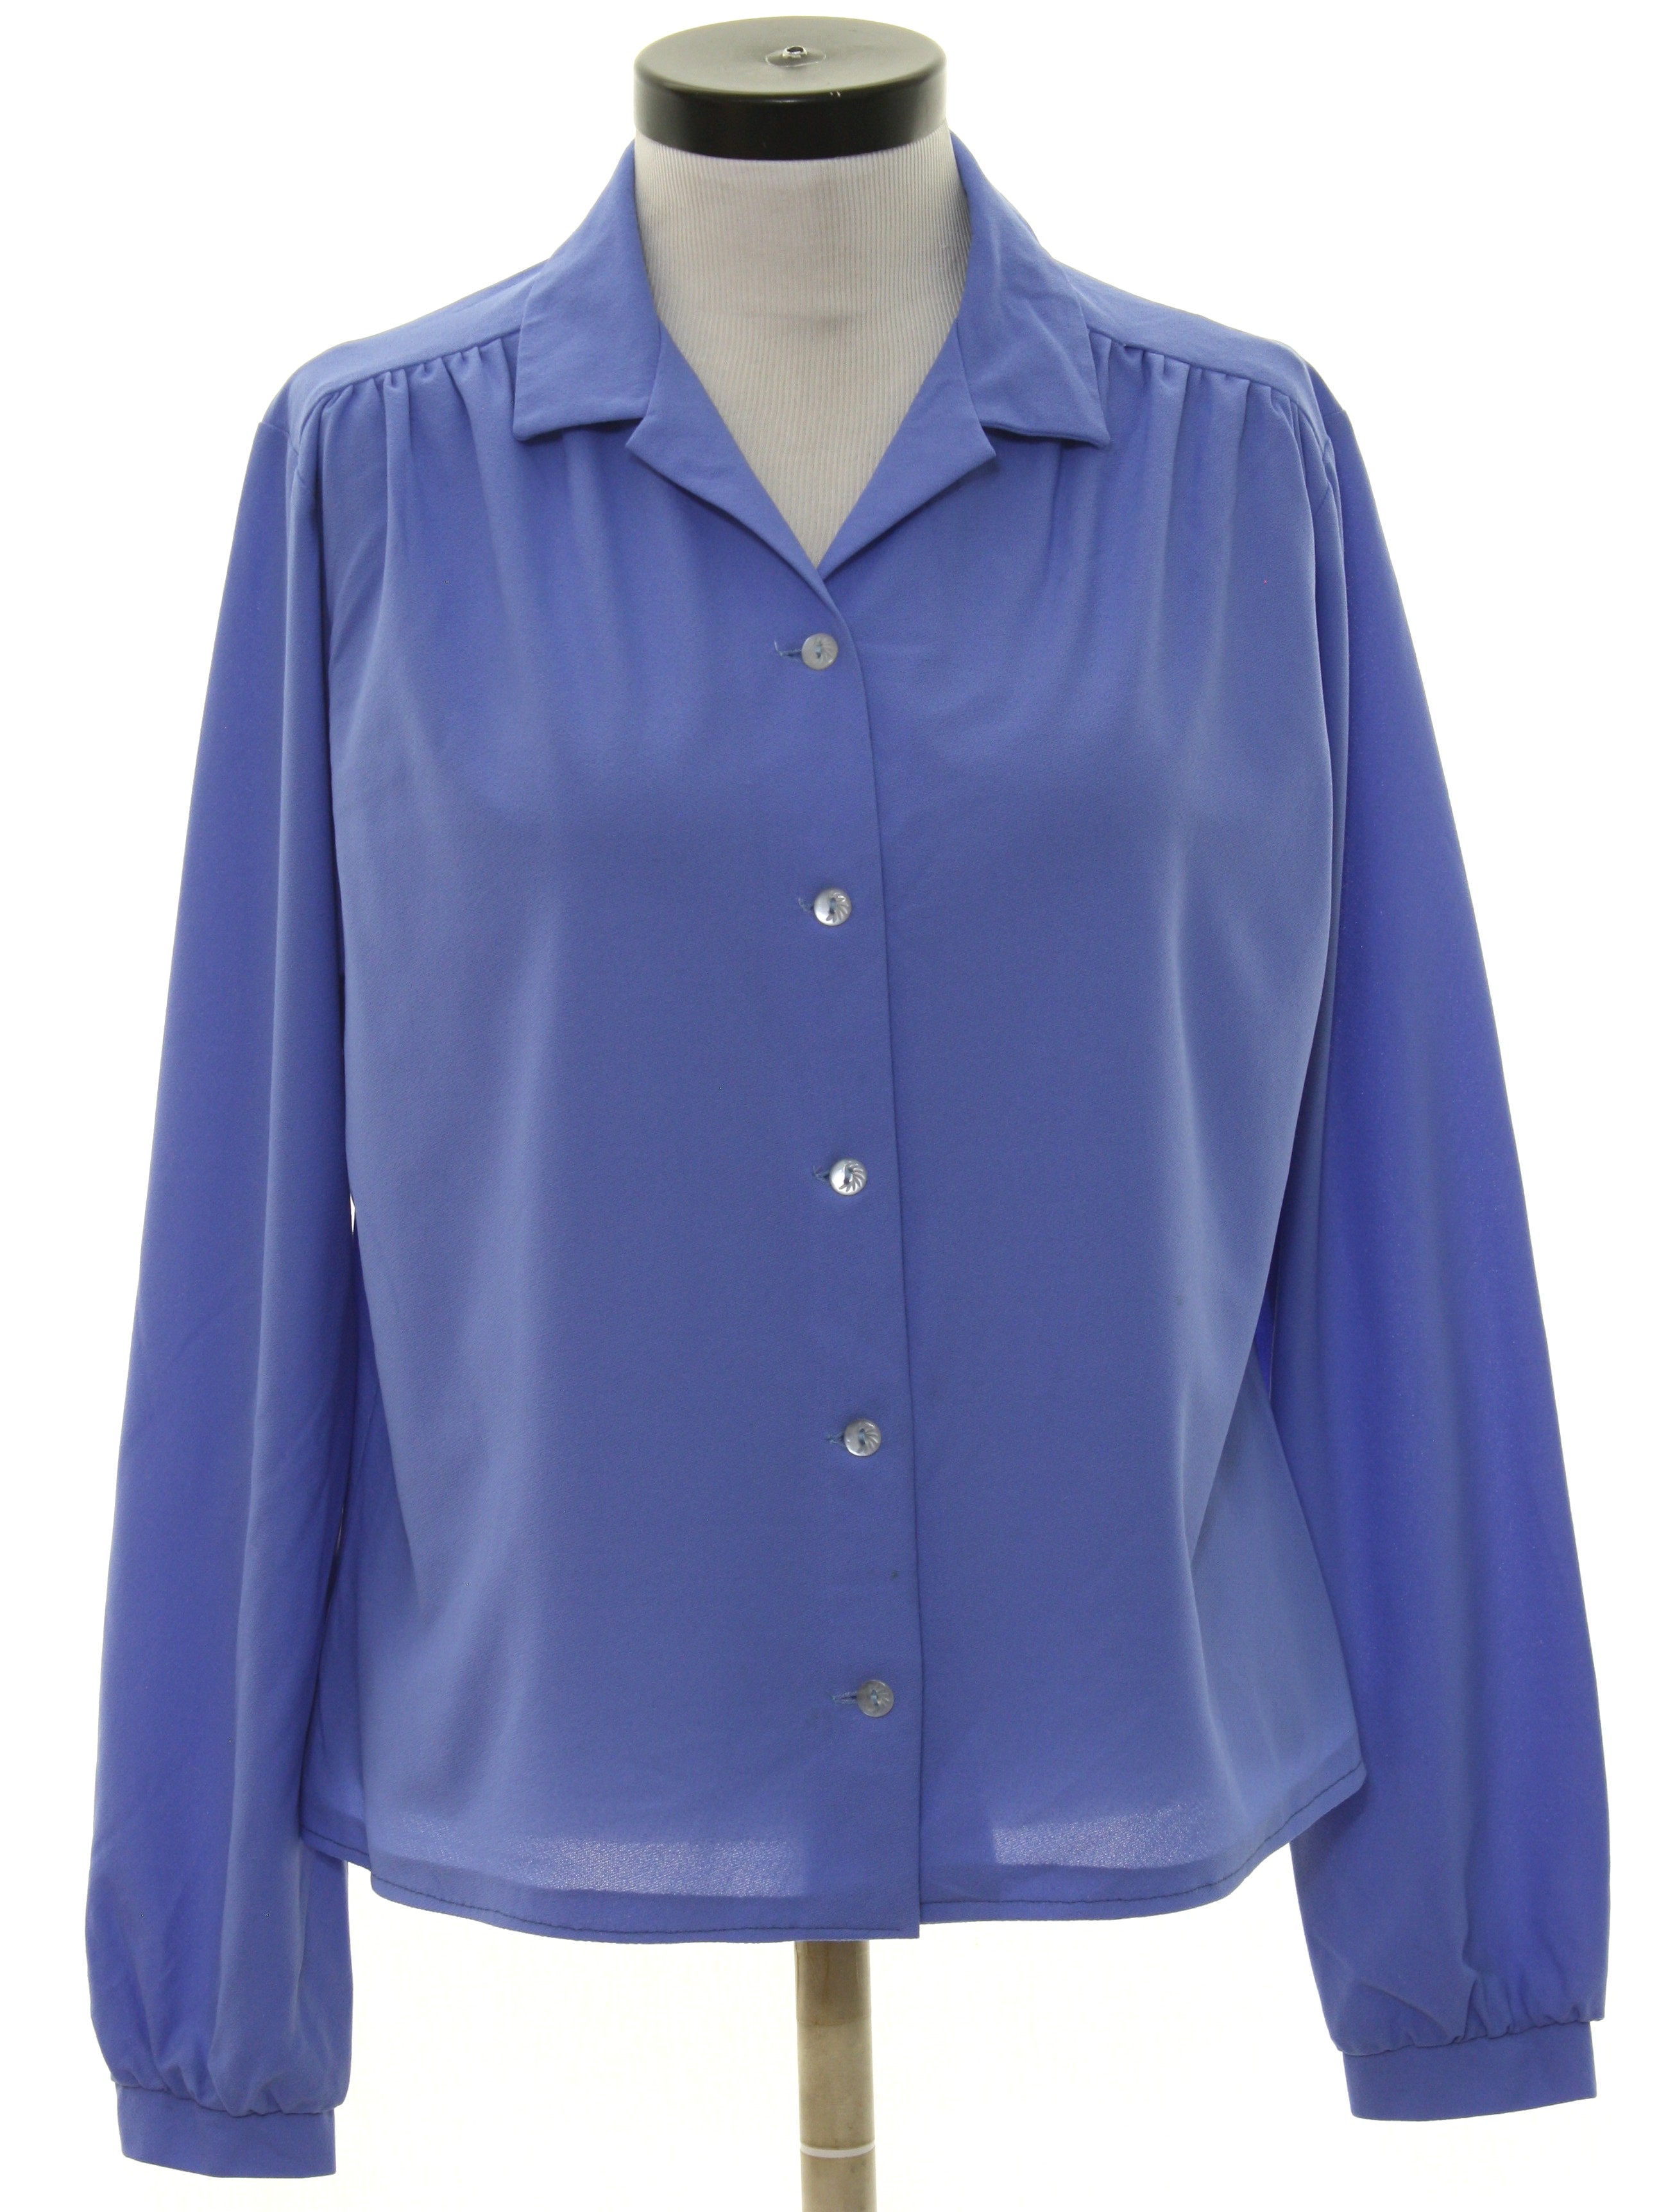 Retro 1970s Shirt: Late 70s -No Label- Womens periwinkle blue polyester ...